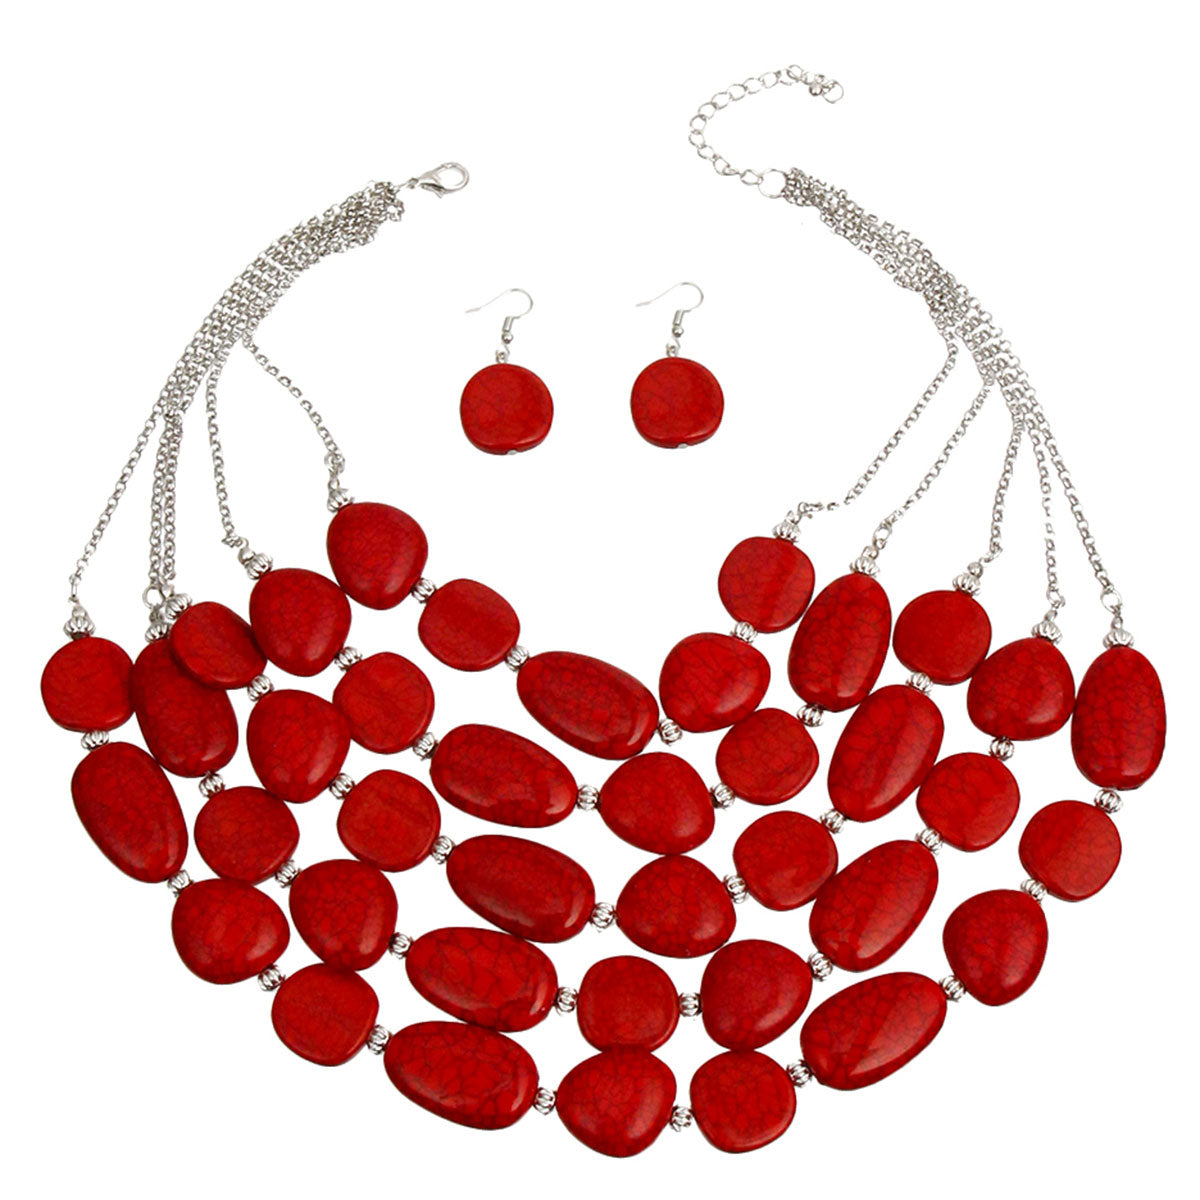 Red Cracked Stone Bead Layered Necklace Set